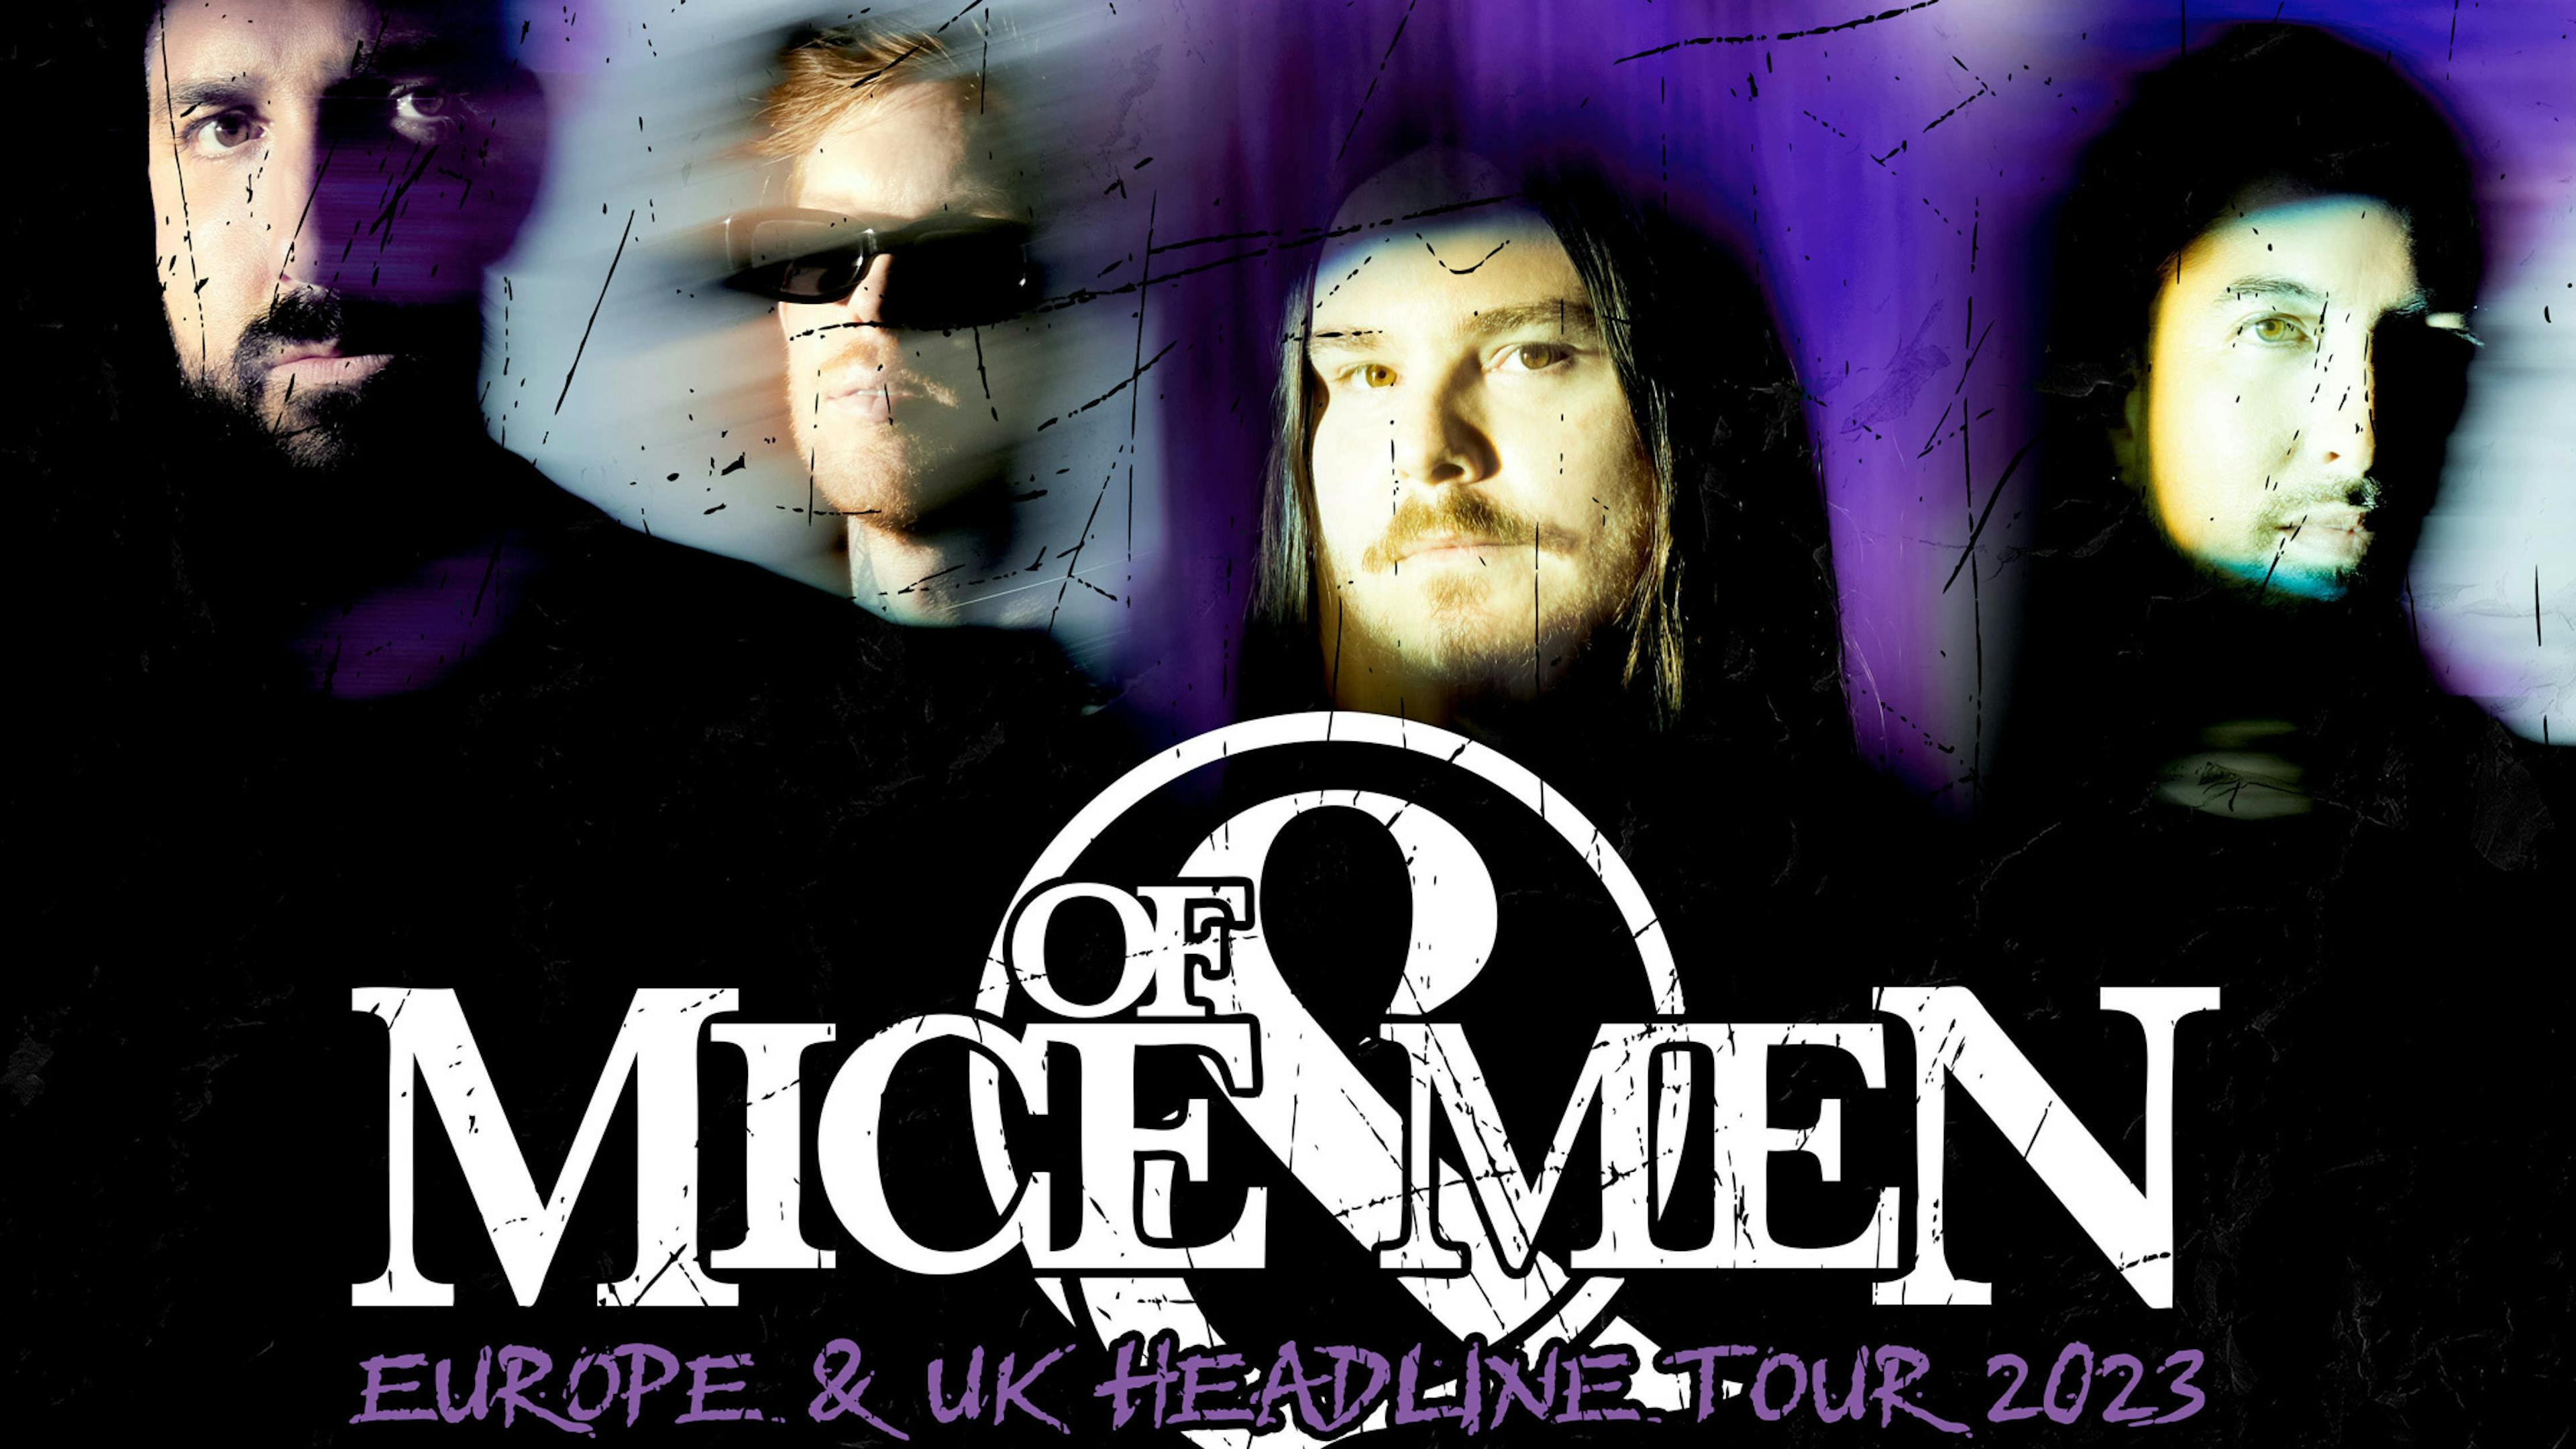 Of Mice & Men announce first UK and European tour in four years